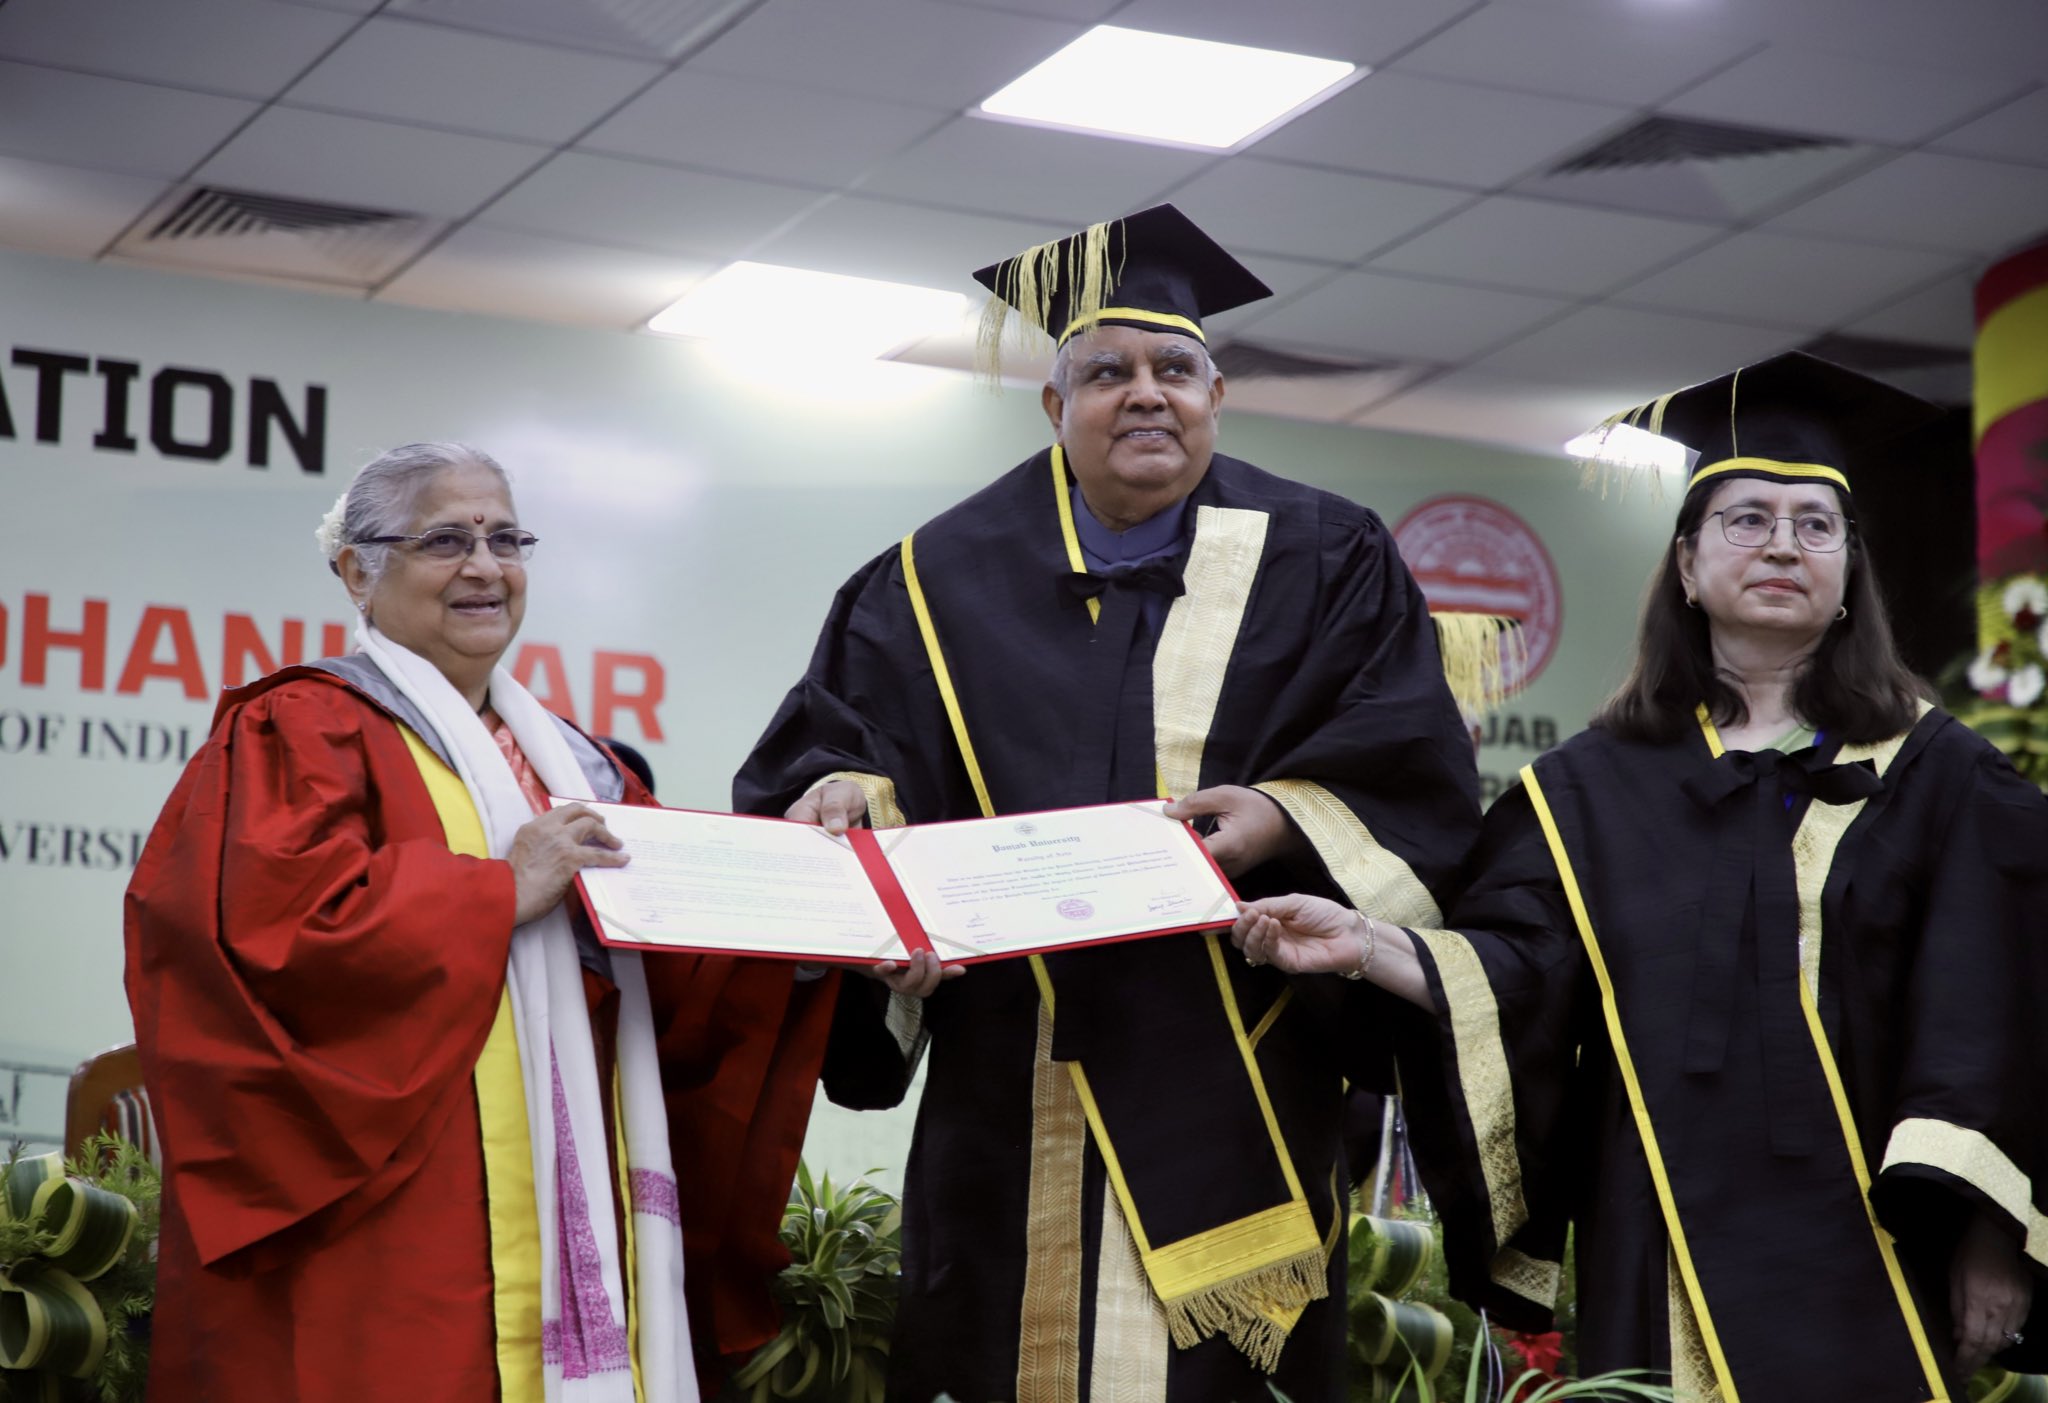 The Vice President, Shri Jagdeep Dhankhar conferring the Honoris Causa (Doctor of Literature) on noted educator, author and philanthropist, Dr Sudha N. Murty at Panjab University  in Chandigarh on May 20, 2023.